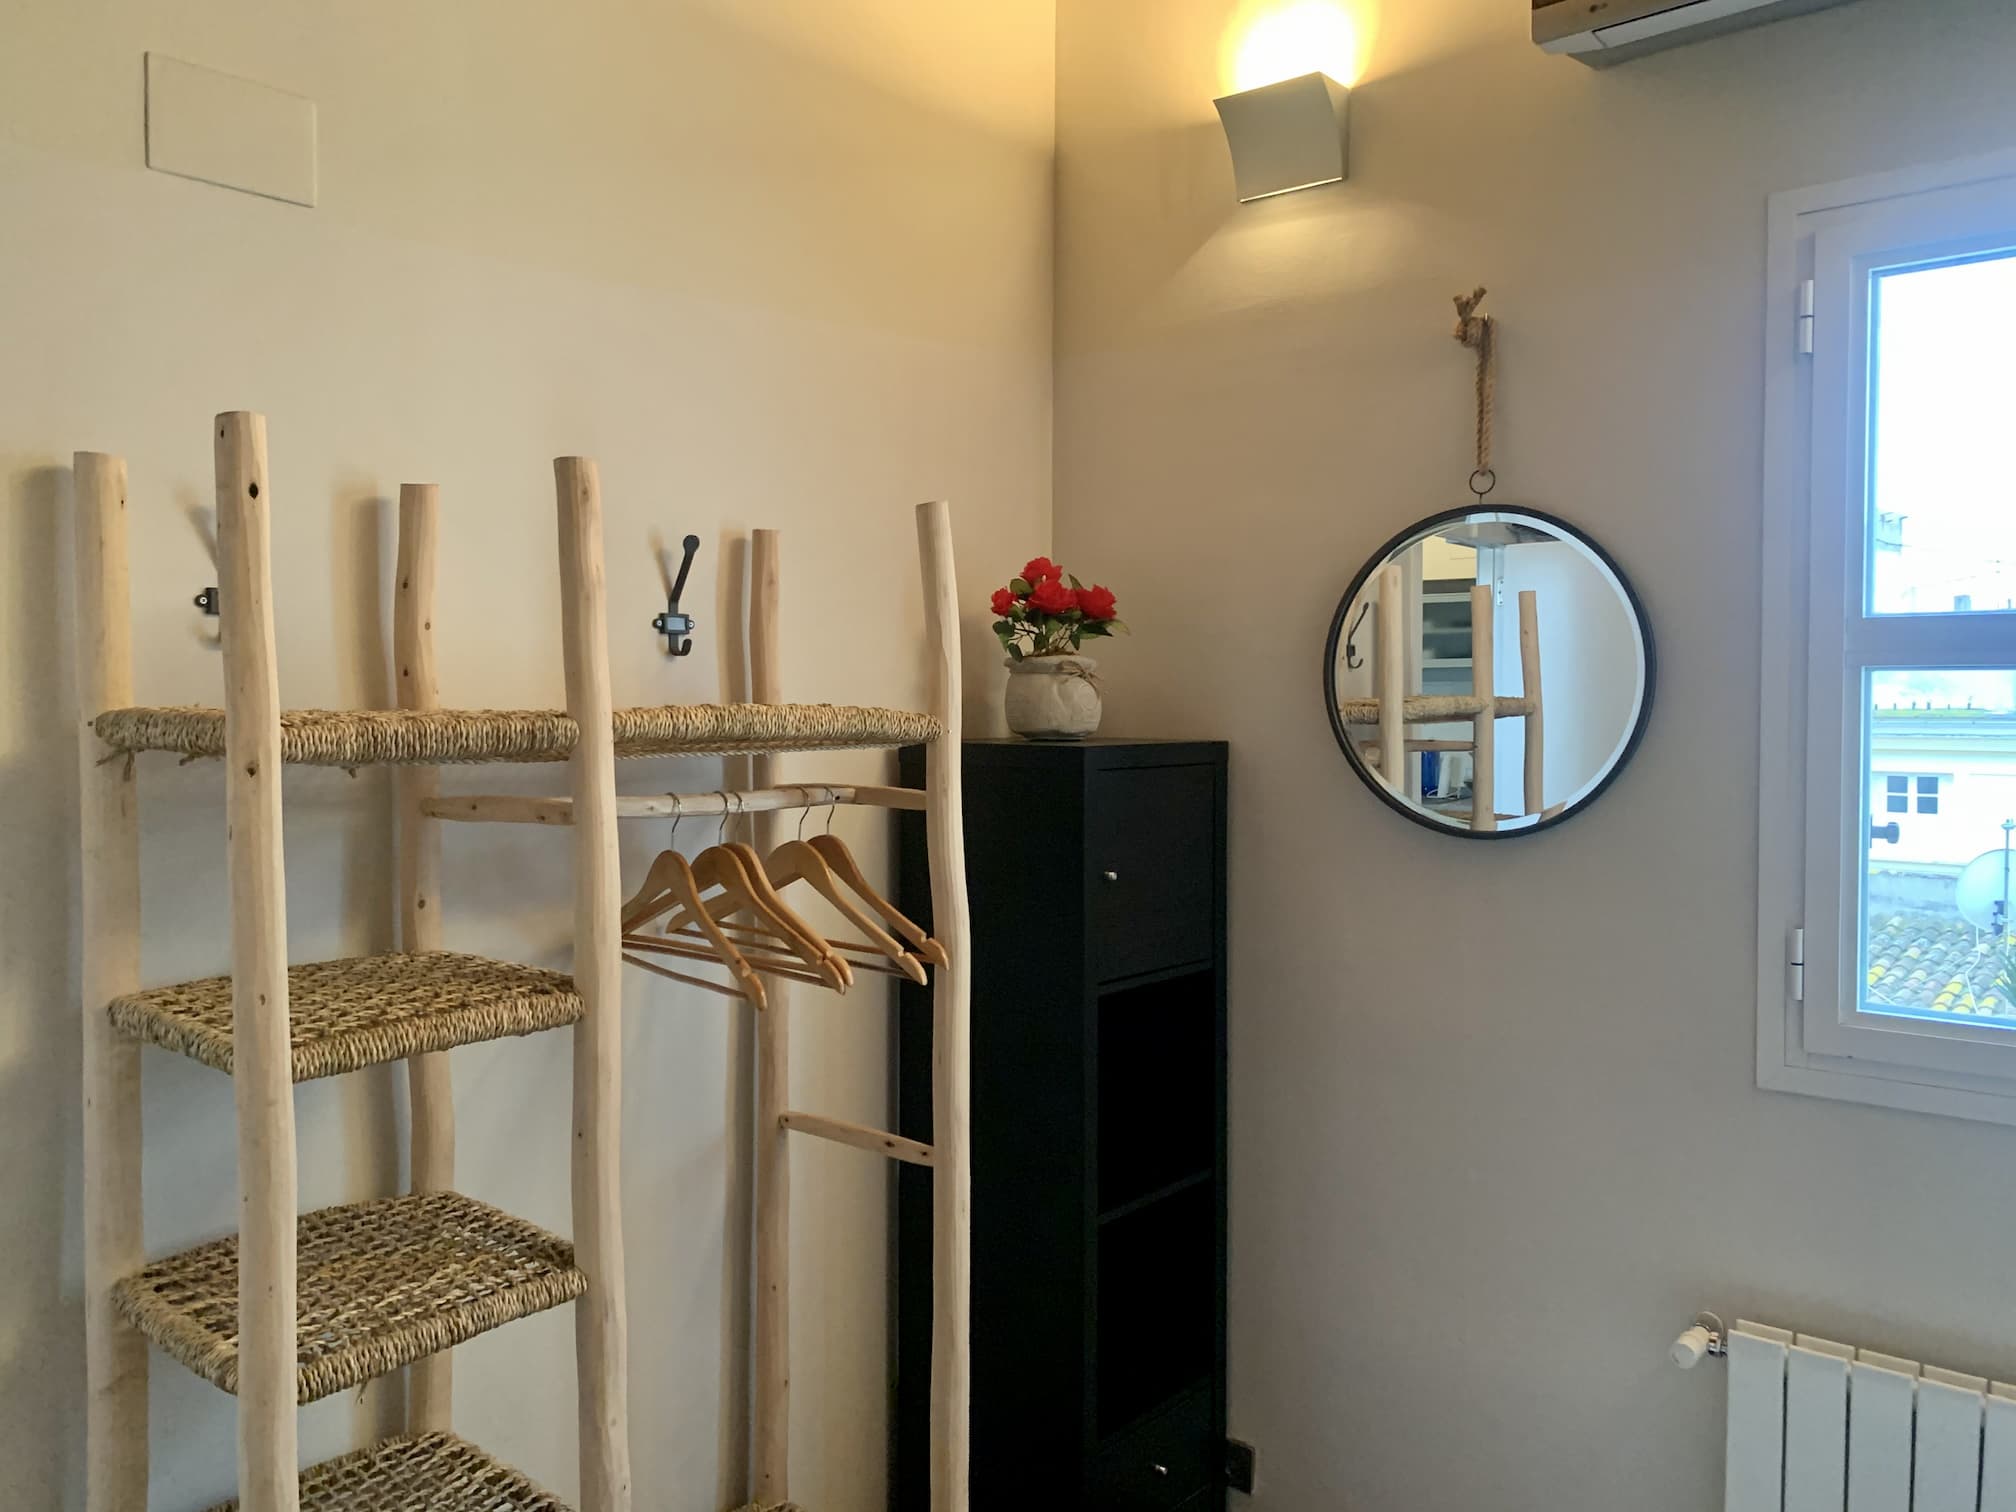 Caballeros - 2 bedroom apartment in Valencia for expats